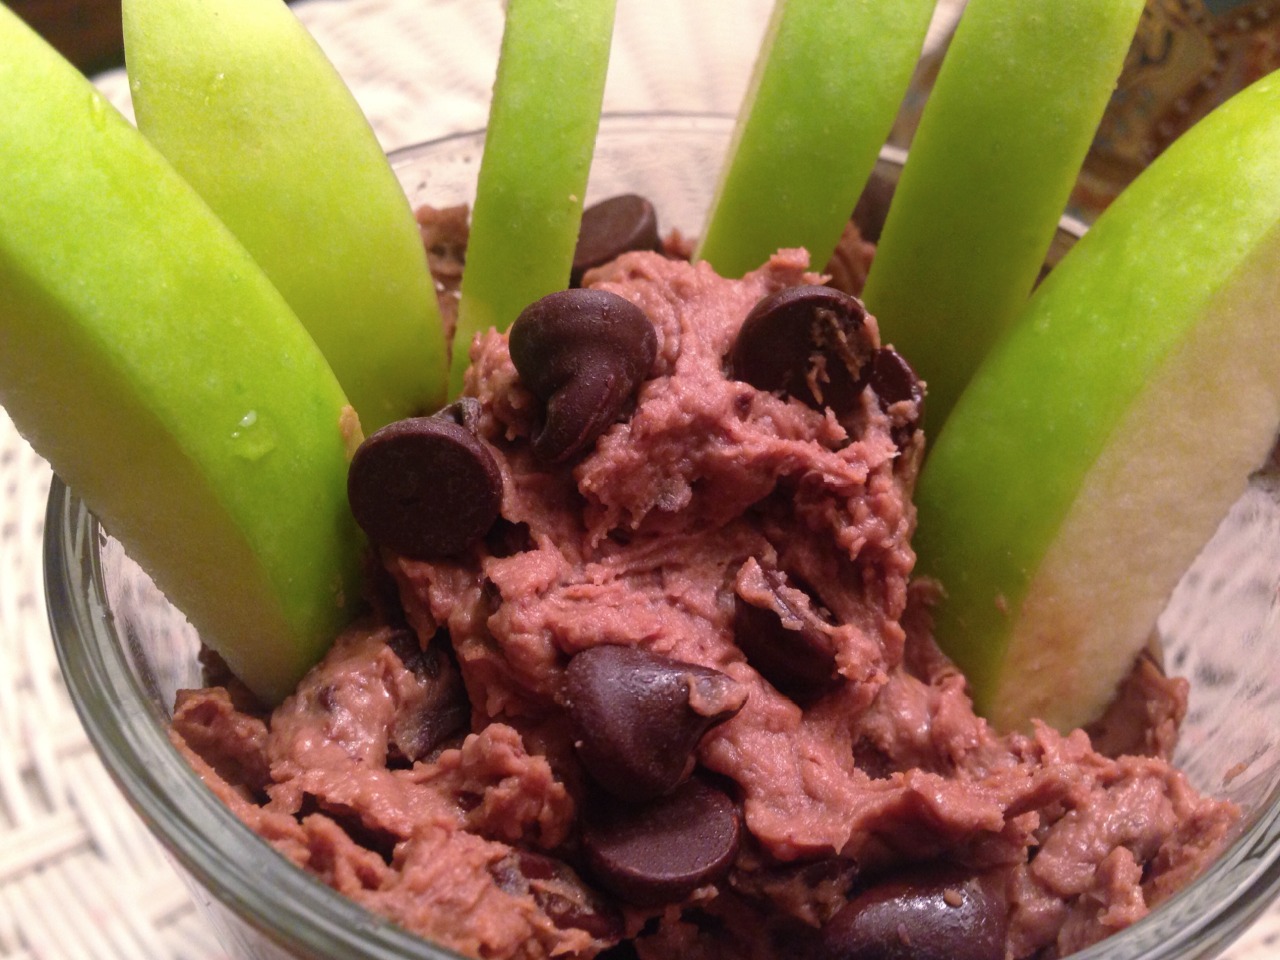 DOUBLE FUDGE CHIP HUMMUS WITH APPLES